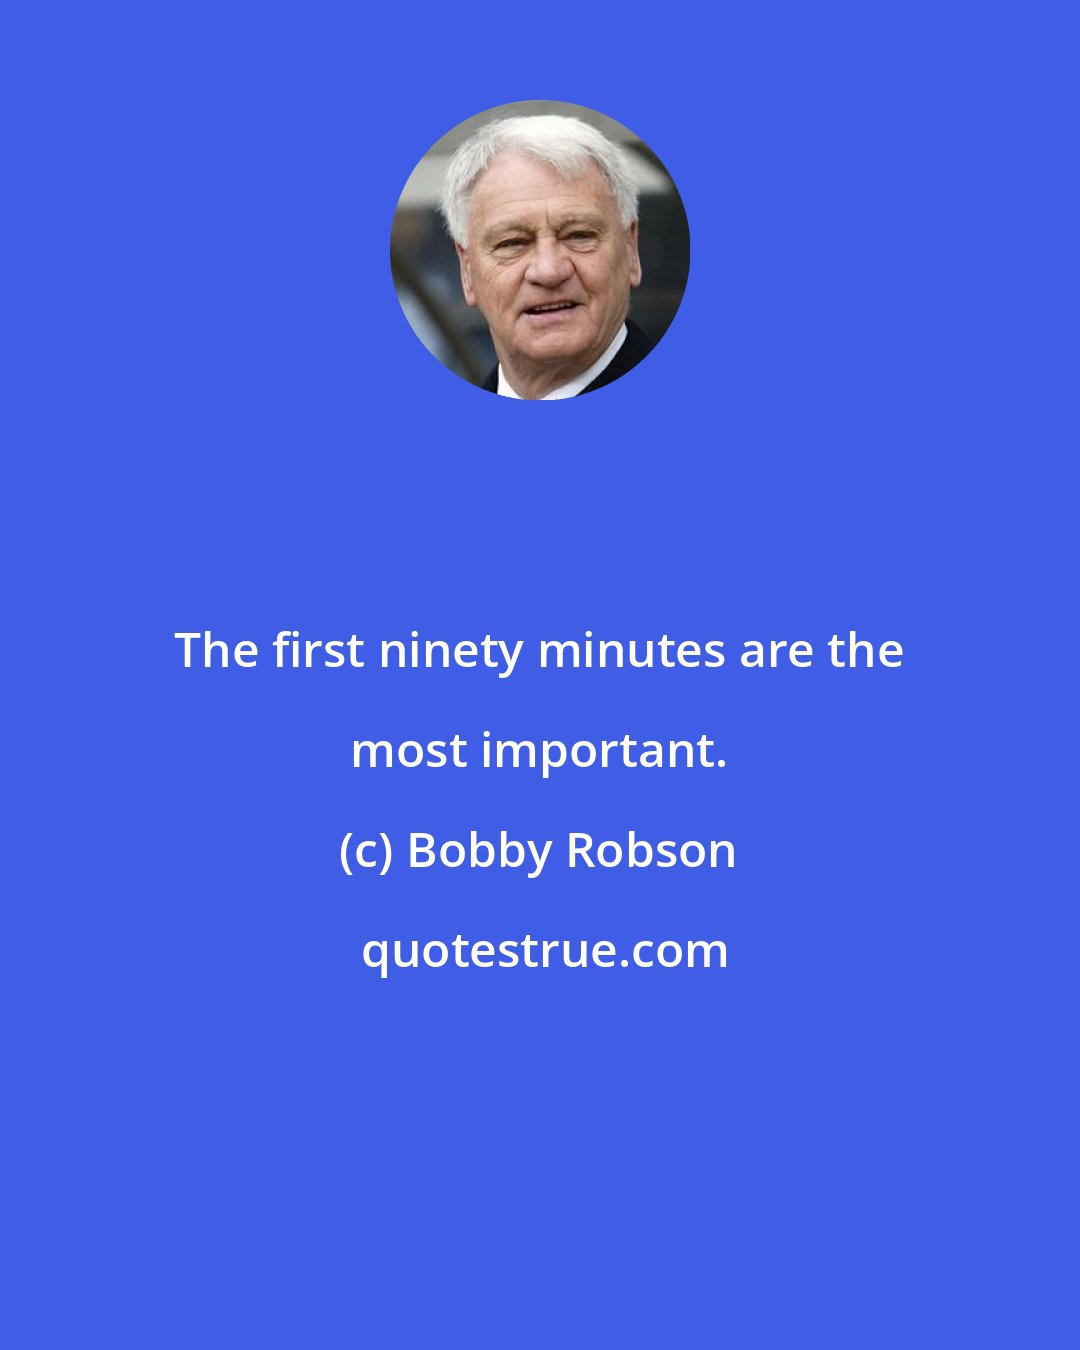 Bobby Robson: The first ninety minutes are the most important.